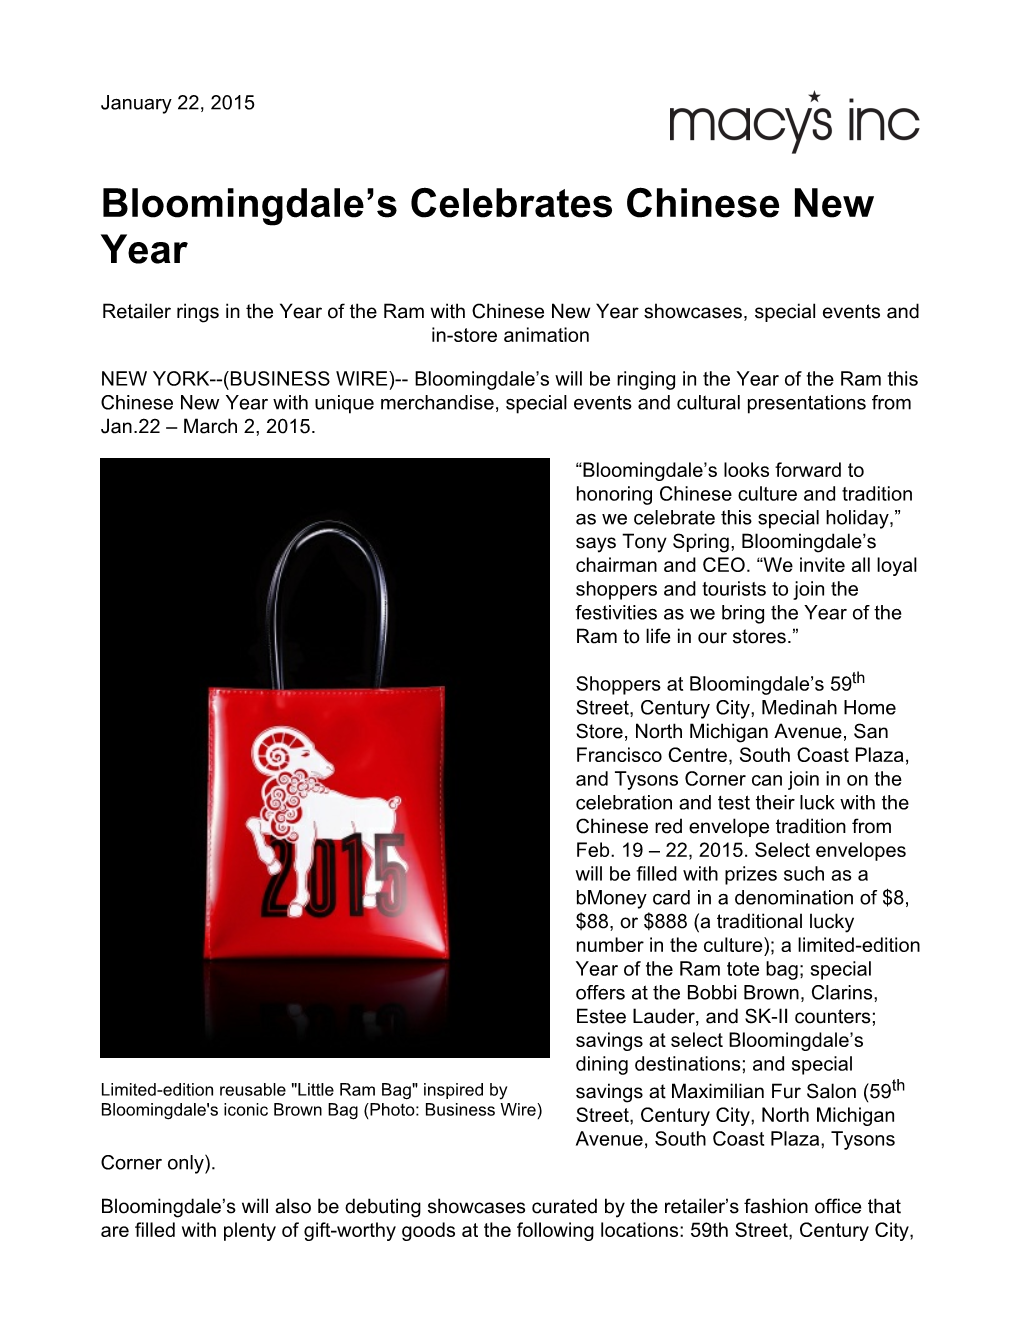 Bloomingdale's Celebrates Chinese New Year